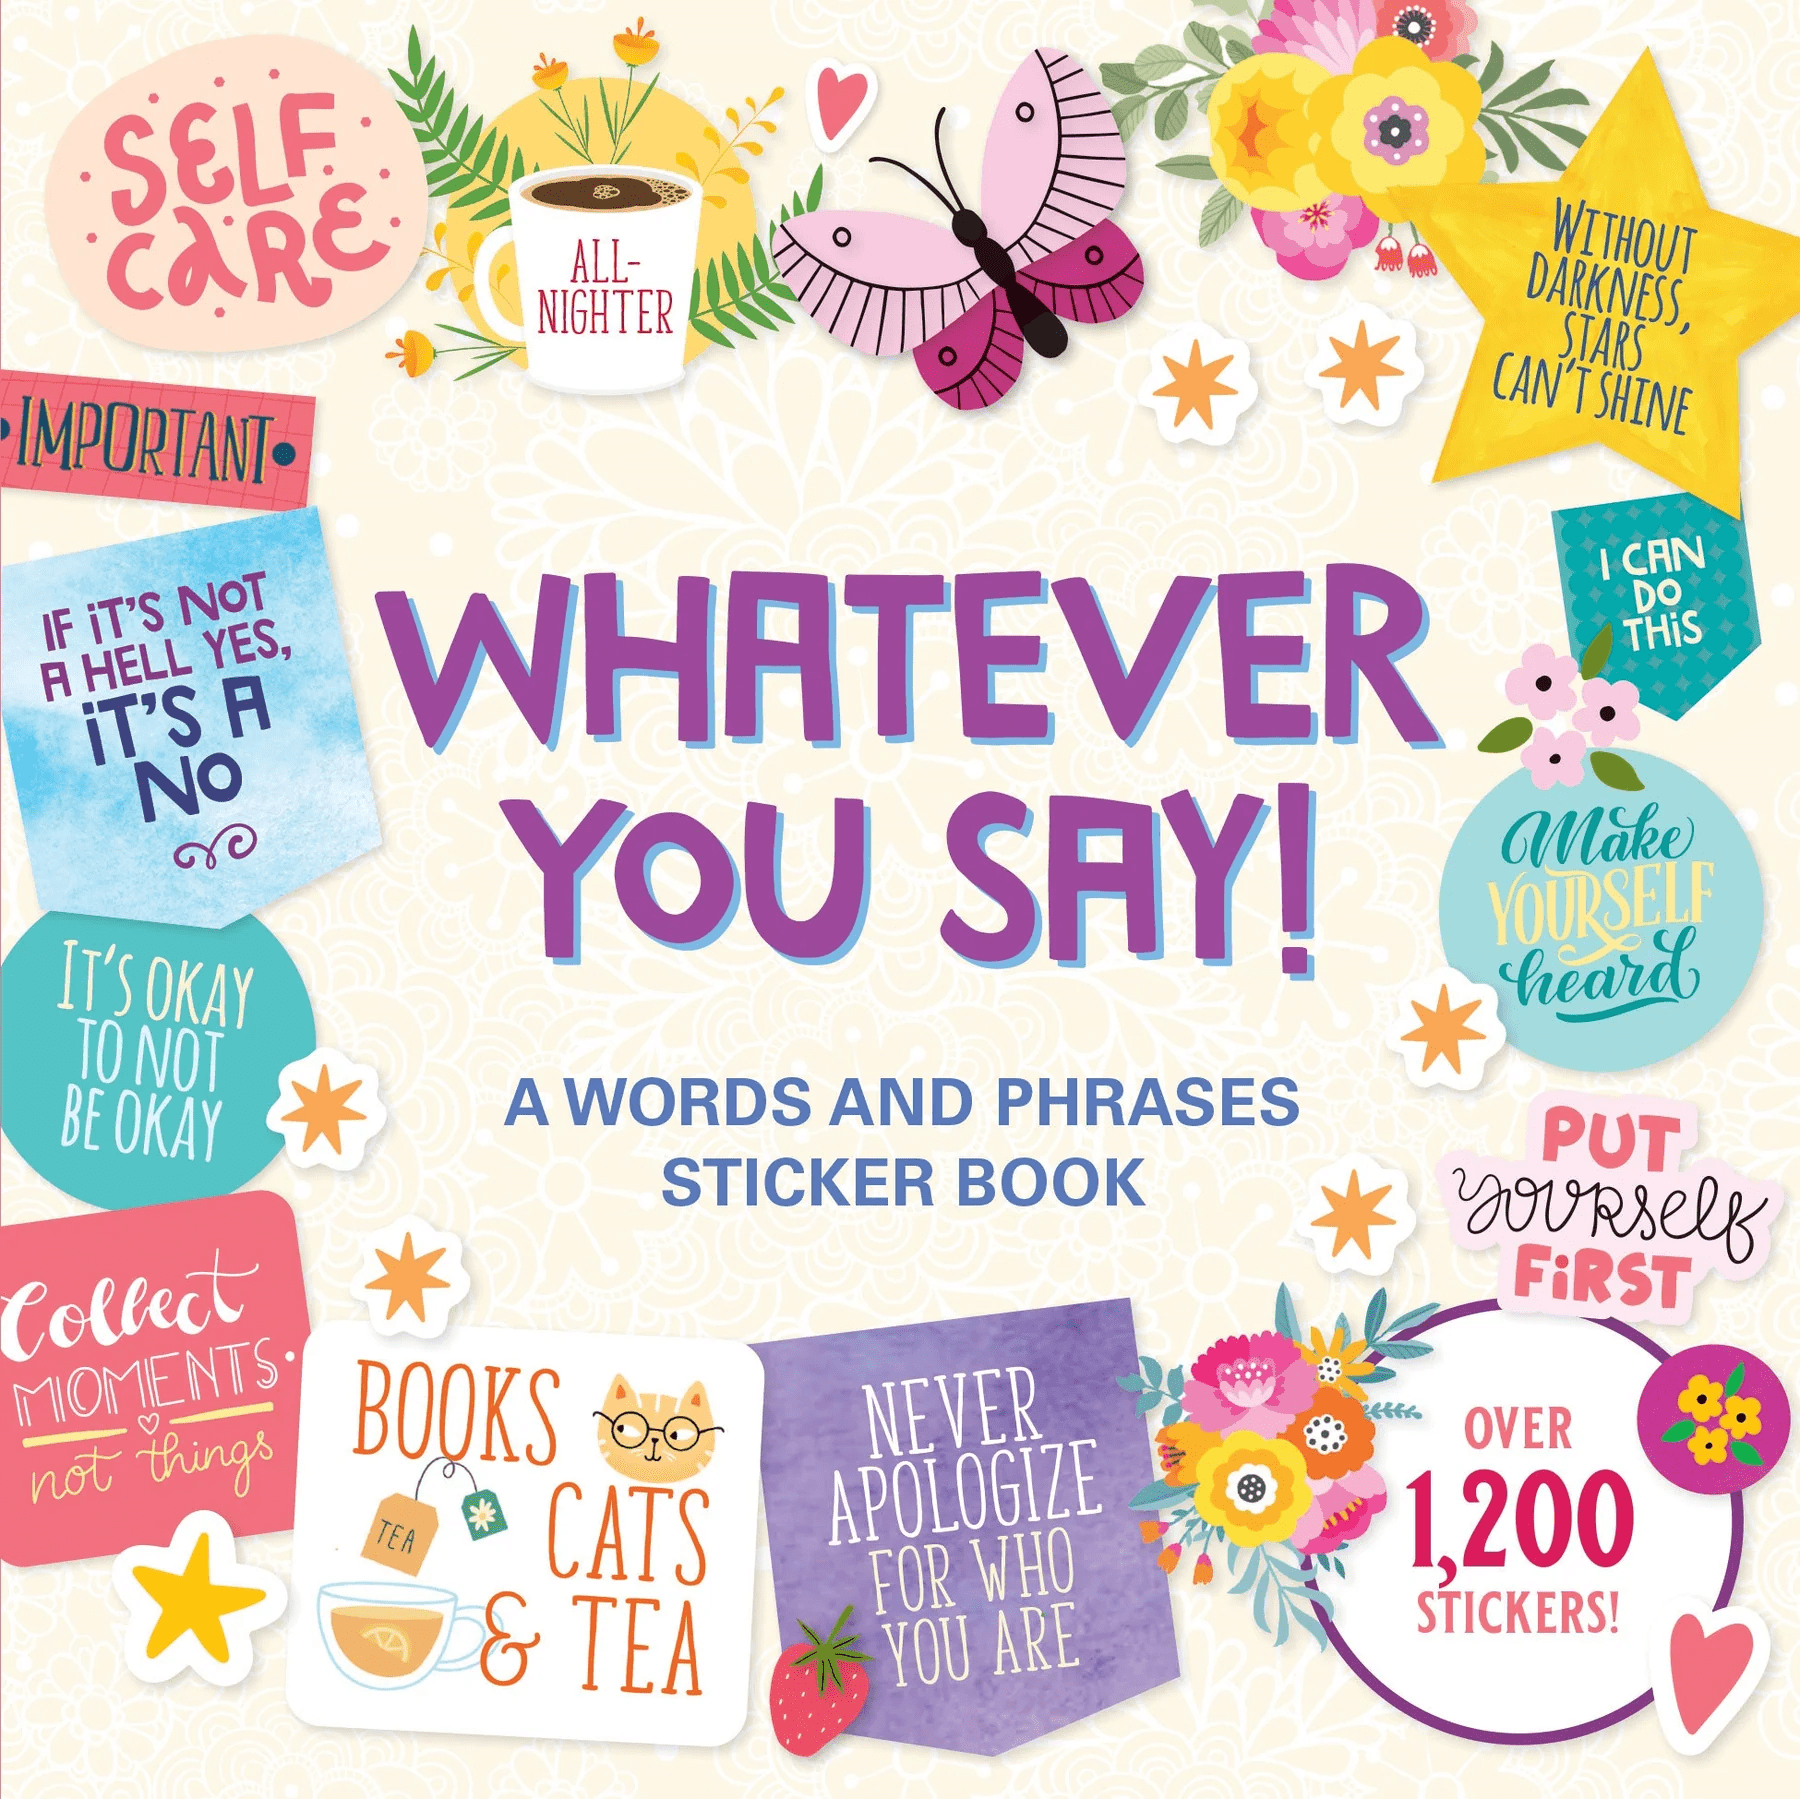 Whatever you say! A words and phrases sticker book - Peter Pauper Press - Tidformera